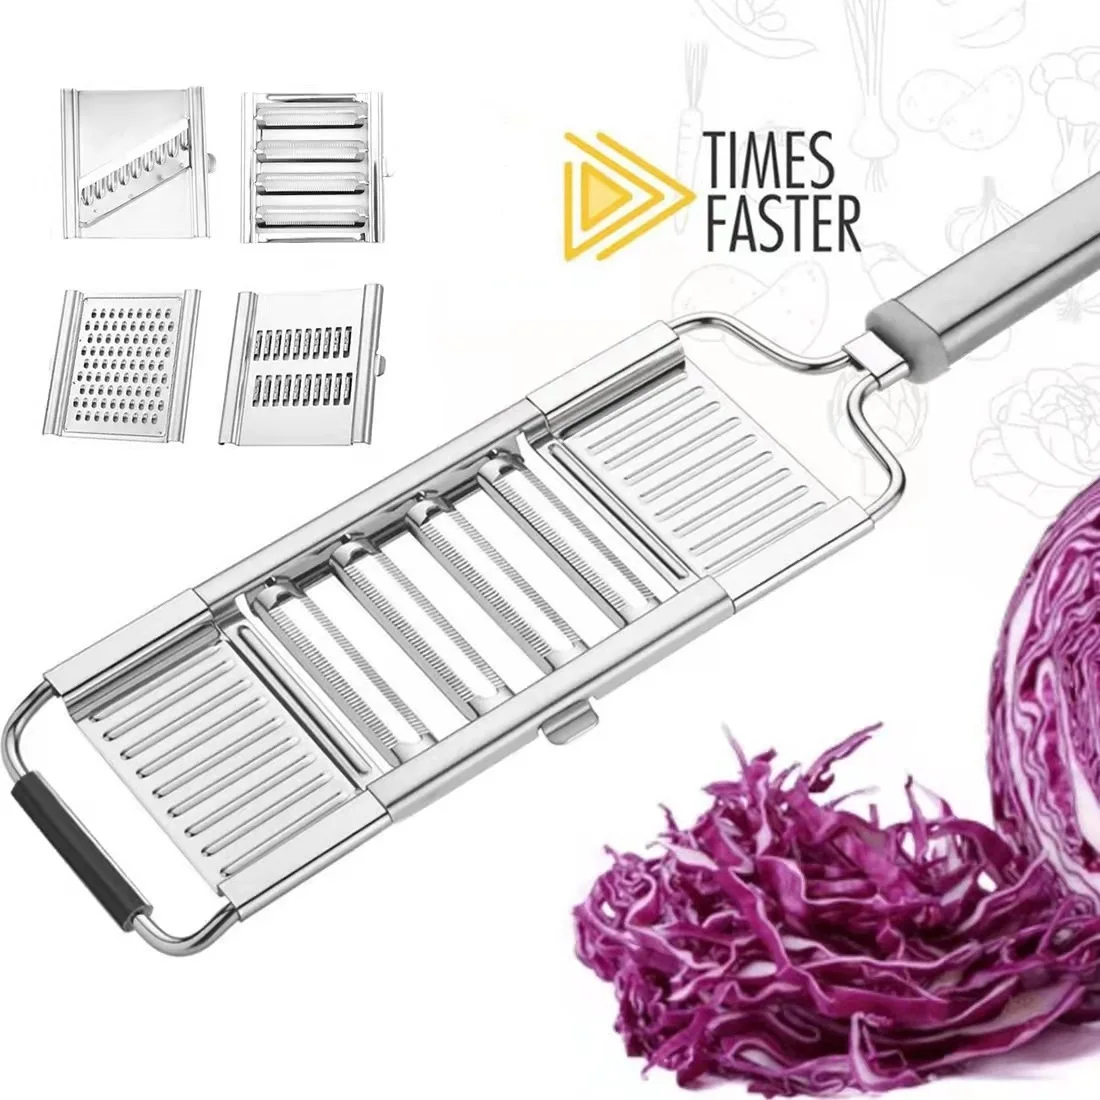 Dishan Handheld Manual Shredder with Sharp Blade and Anti-Slip Handle - Perfect for Shredding Vegetables, Butter, and Fruits - Essential Kitchen